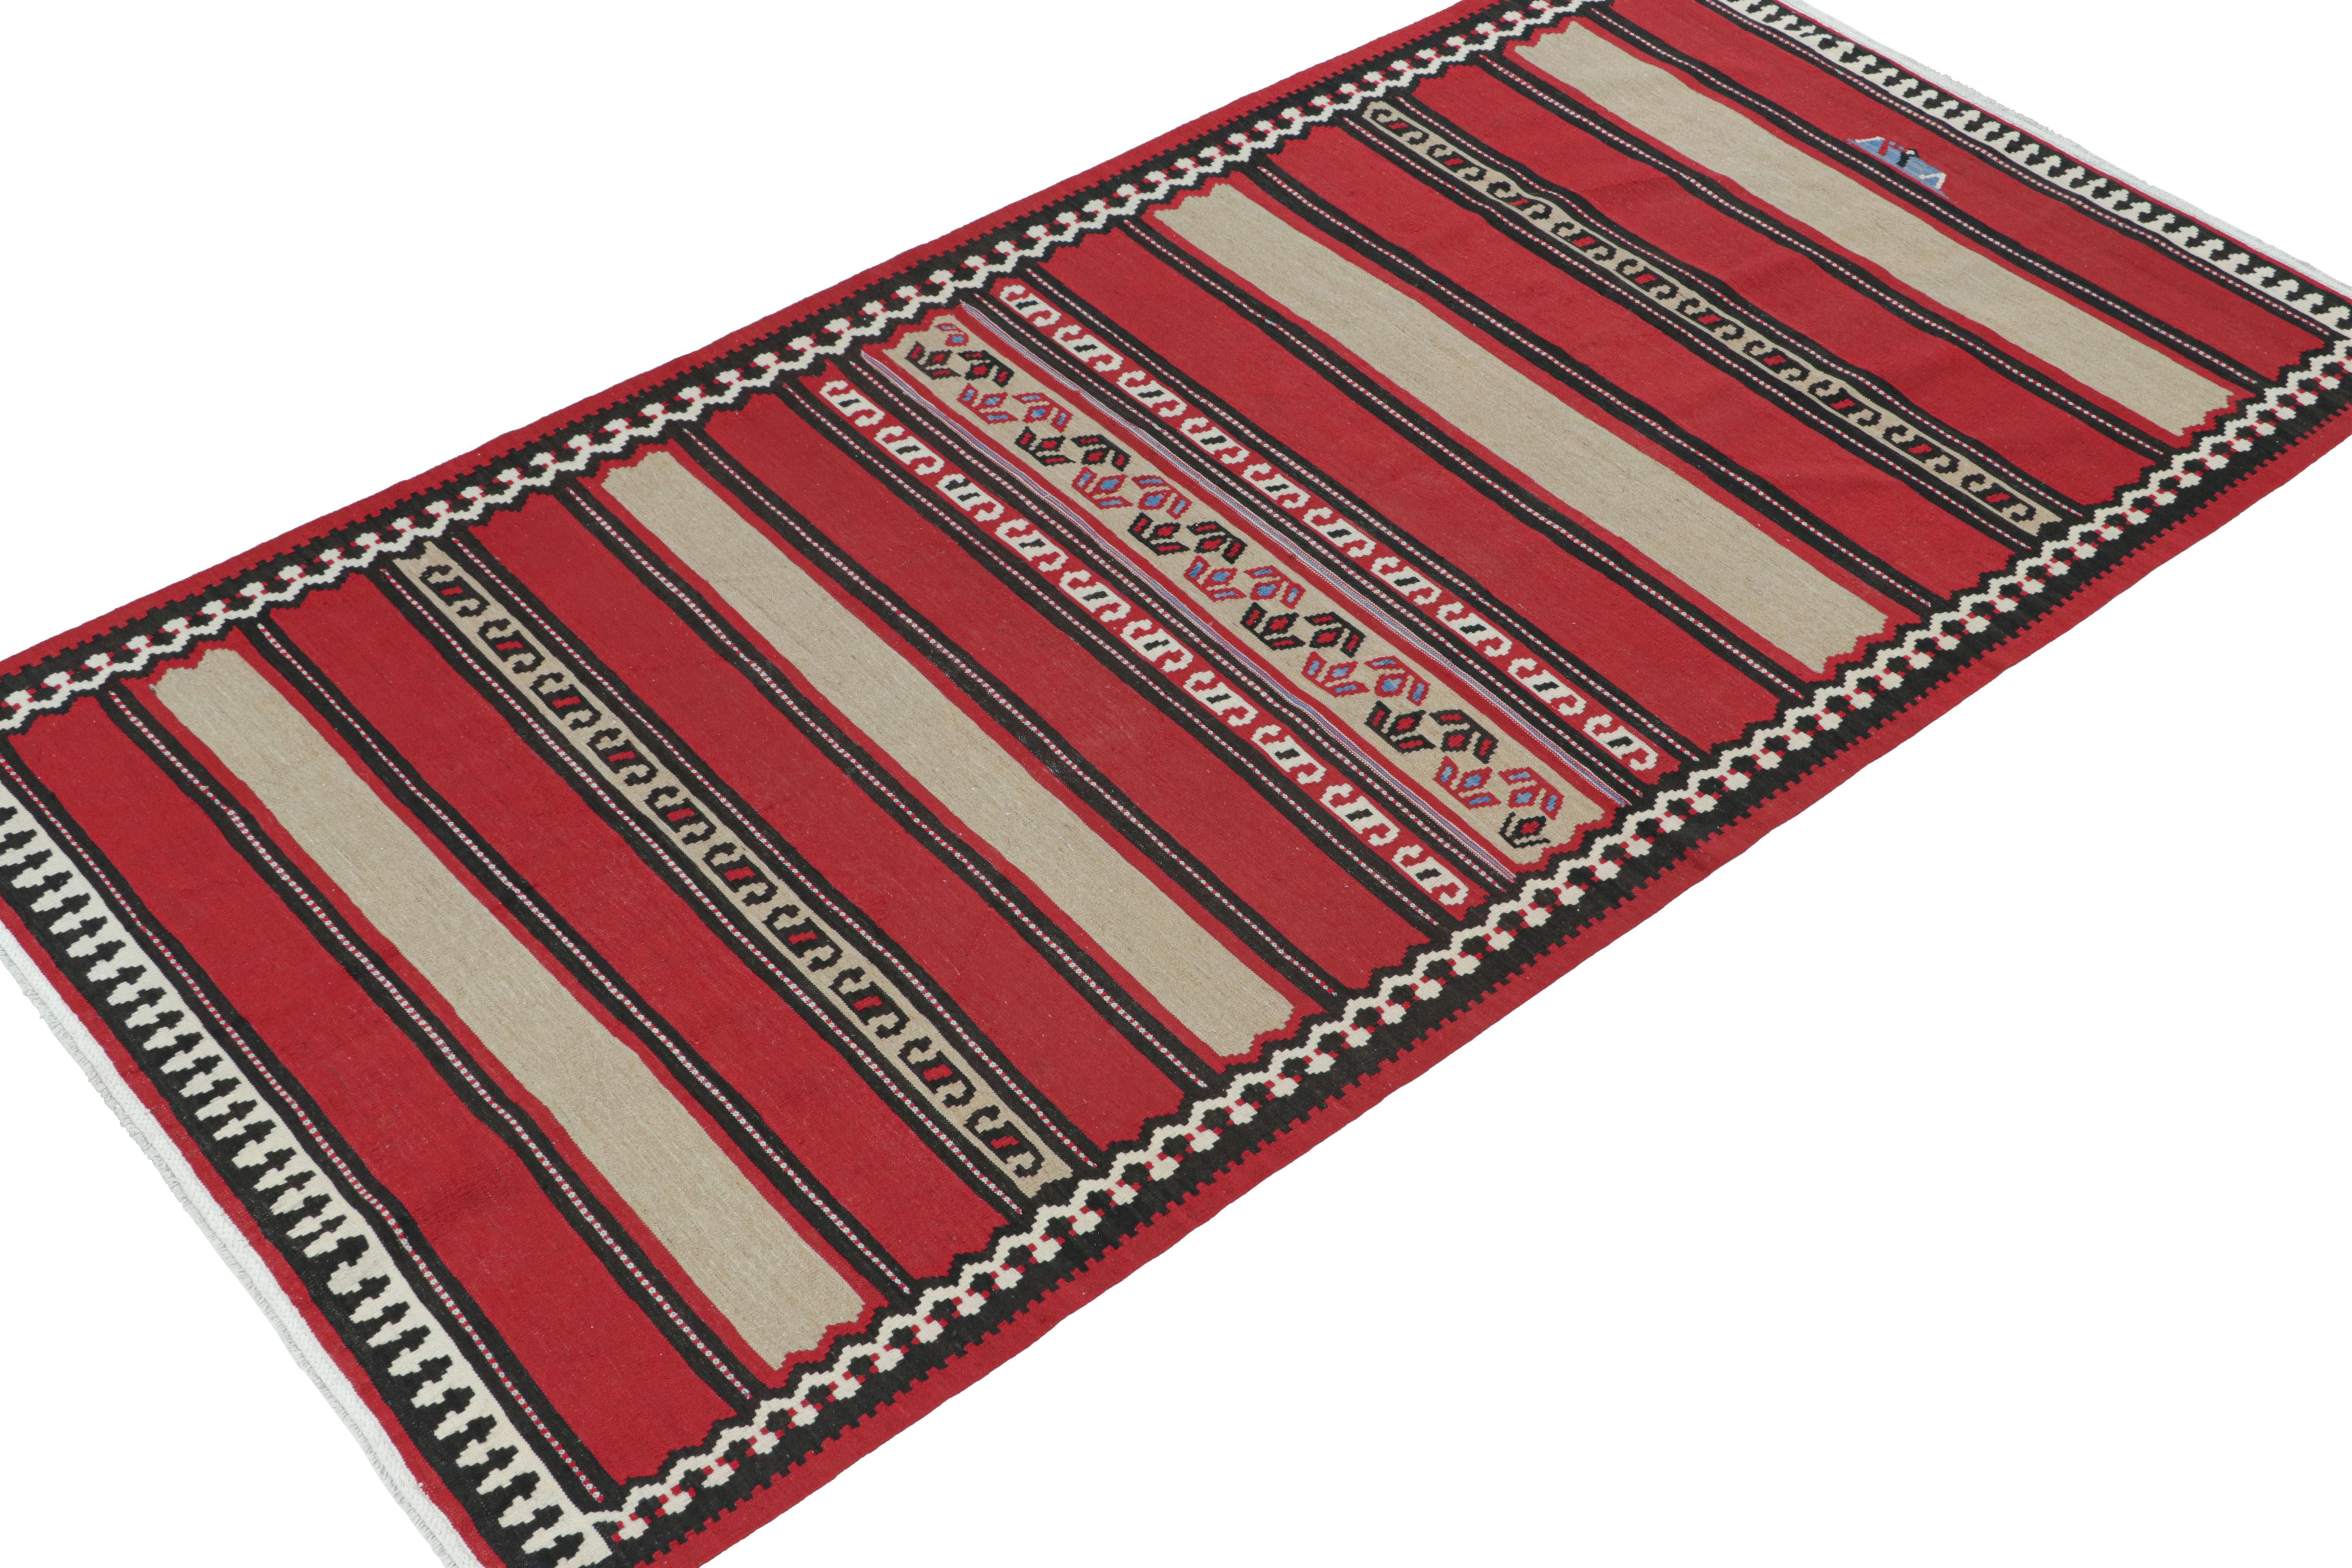 This vintage 5x10 Persian Kilim is believed to be a Shahsavan tribal rug. Handwoven in wool, it originates circa 1950-1960 and enjoys a play of stripes and geometric patterns in red, beige, and brown. 

Further on the Design:

Keen eyes may